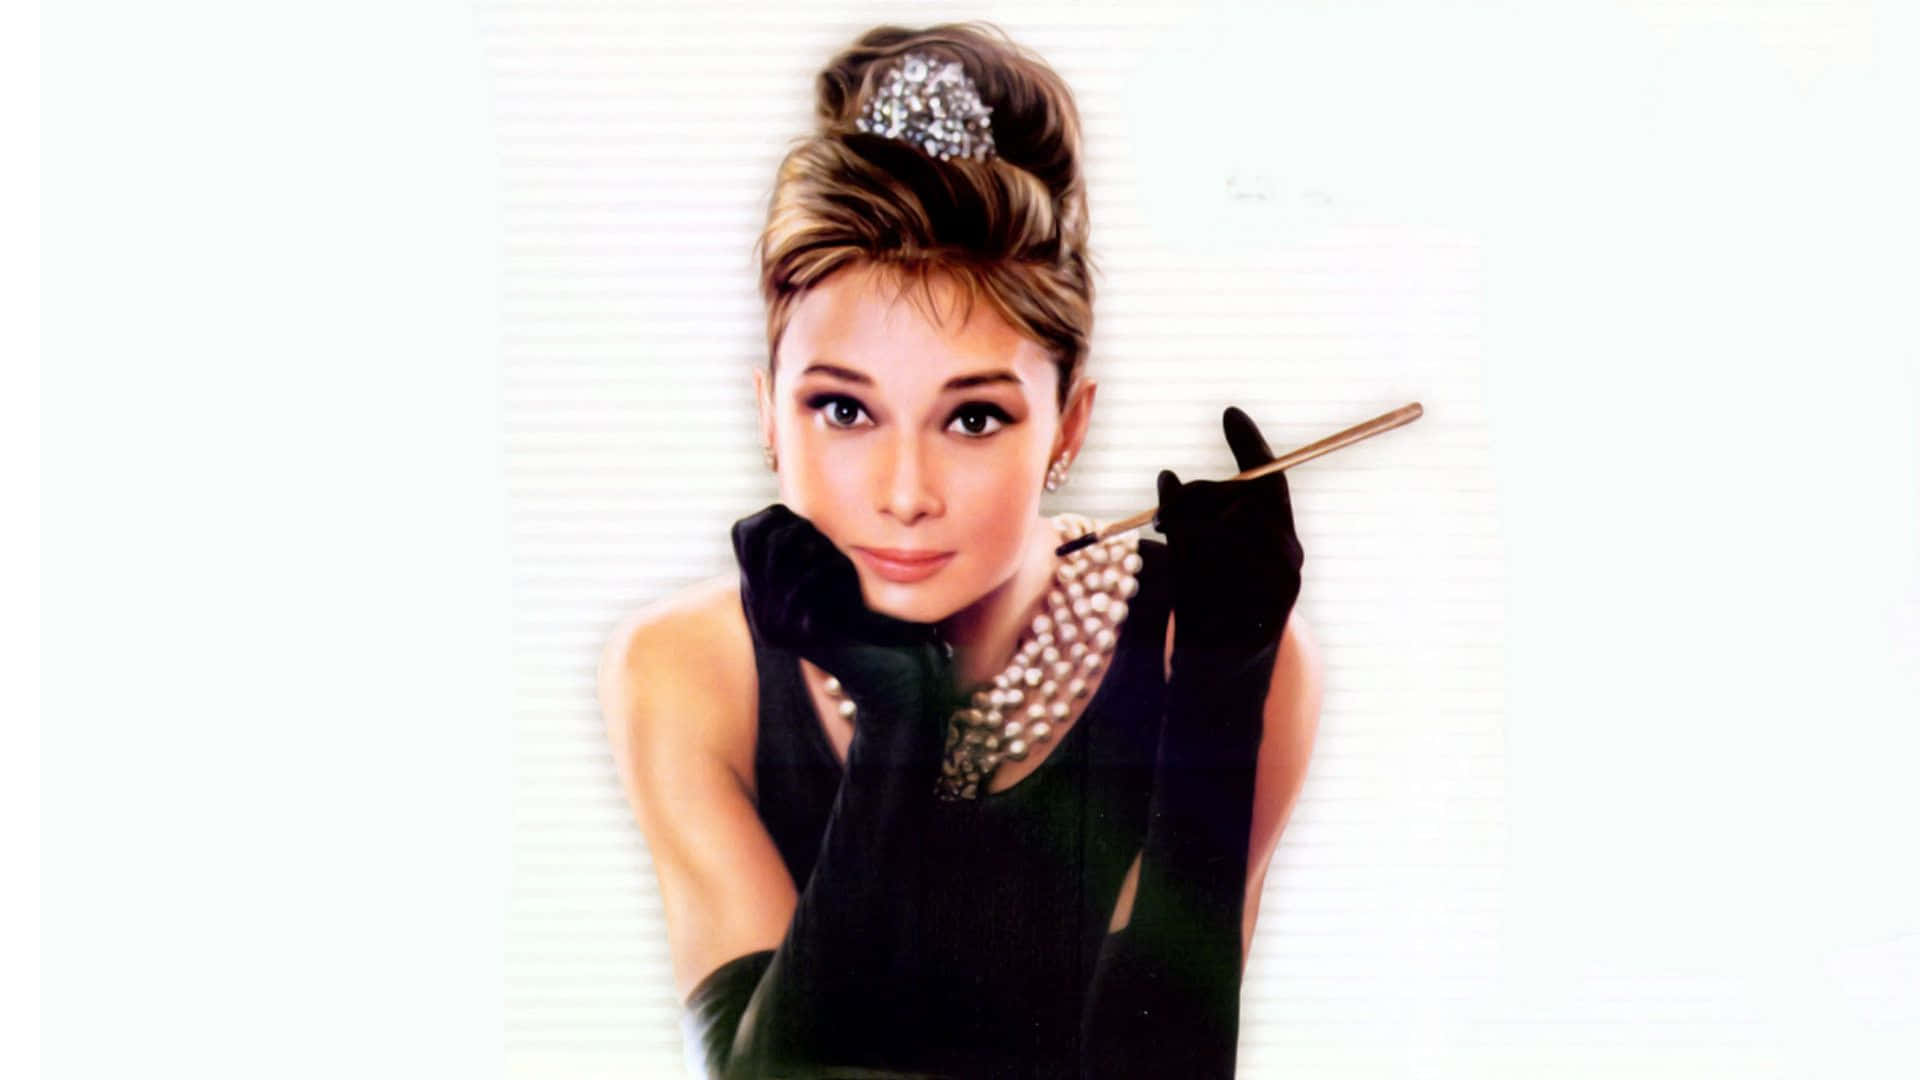 Image  Audrey Hepburn looking stunning as Holly Golightly in "Breakfast at Tiffany's" Wallpaper